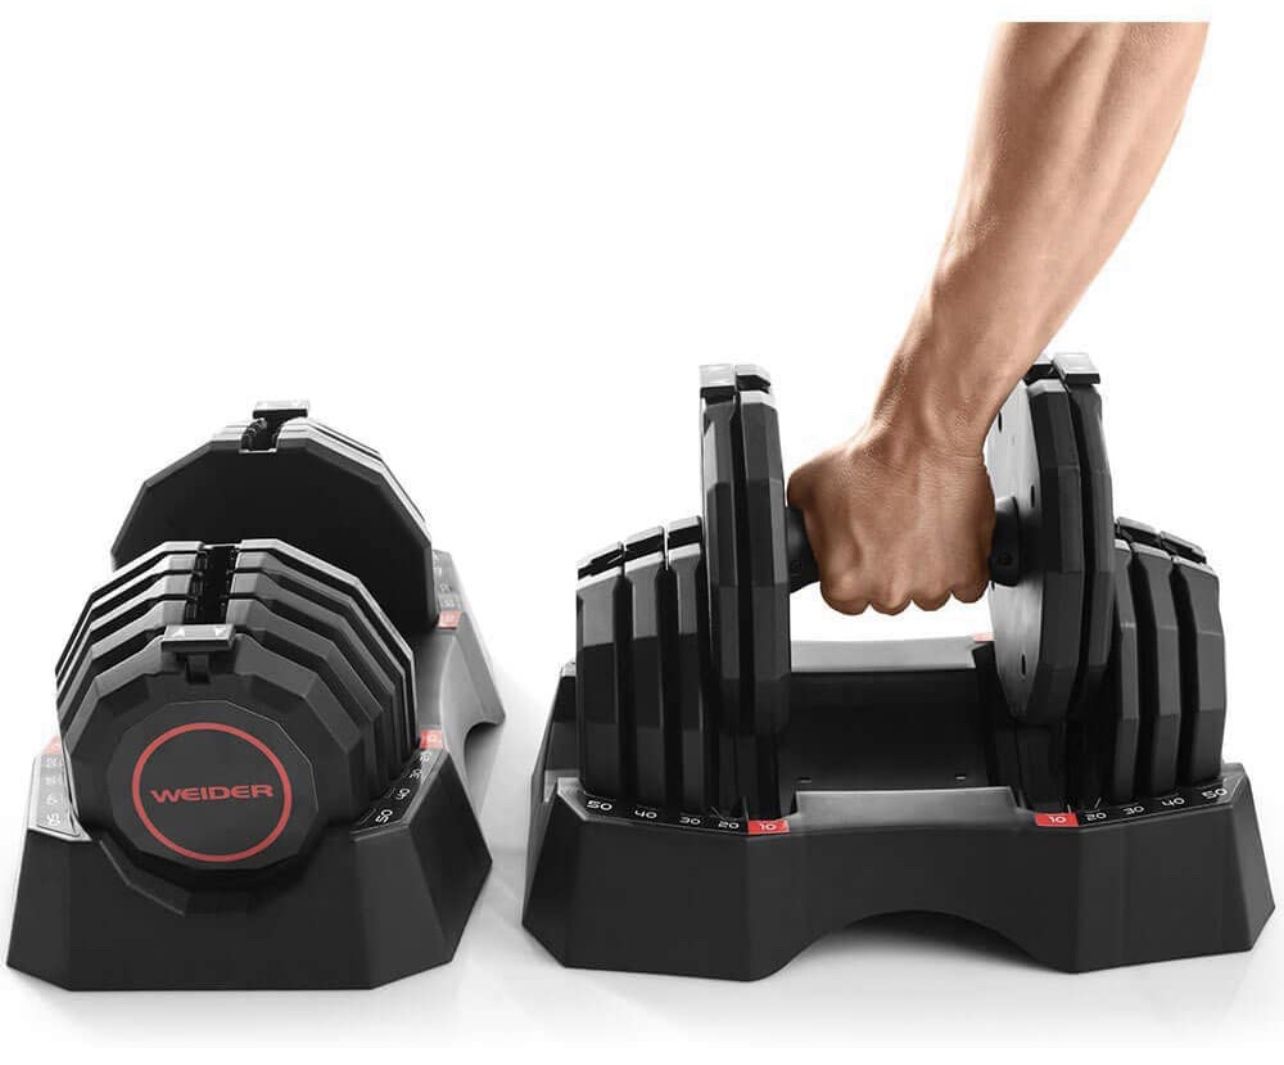 Weider Select-A-Weight Adjustable 50 Pound Dumbbells